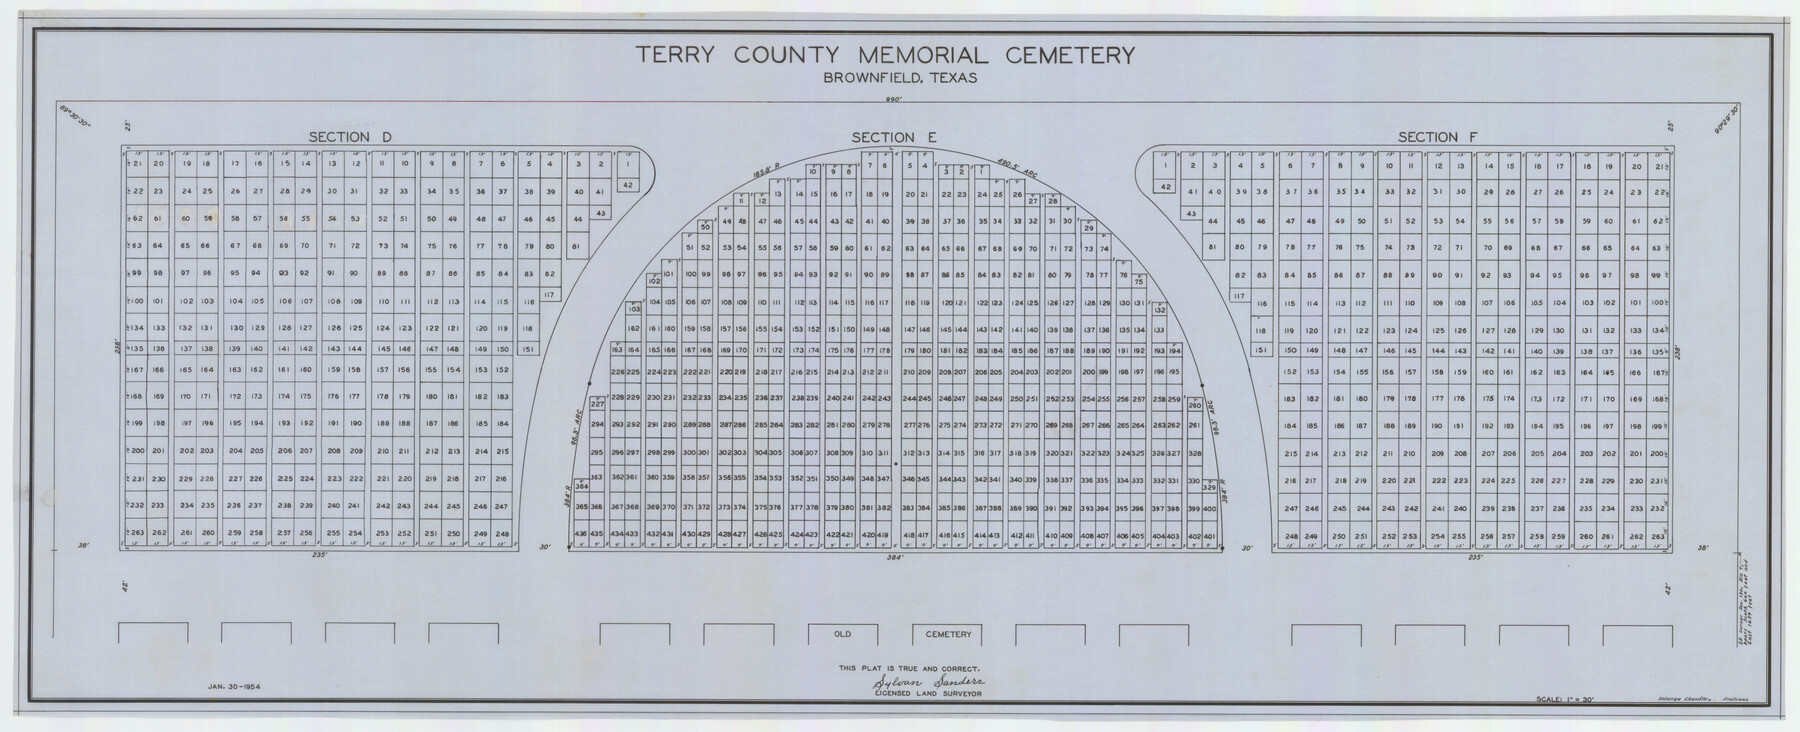 92931, Terry County Memorial Cemetery, Twichell Survey Records